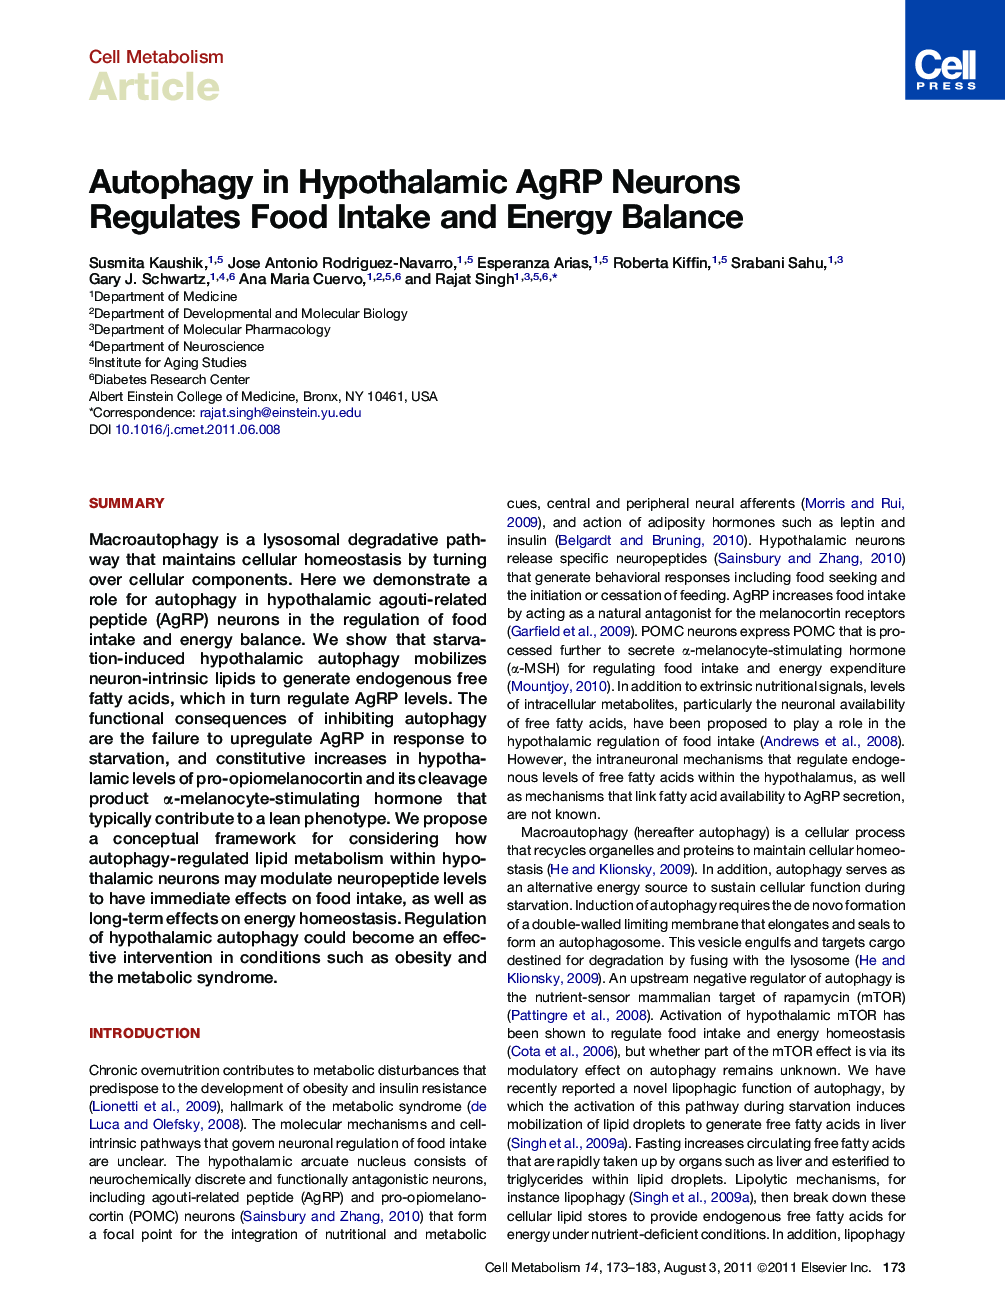 Autophagy in Hypothalamic AgRP Neurons Regulates Food Intake and Energy Balance